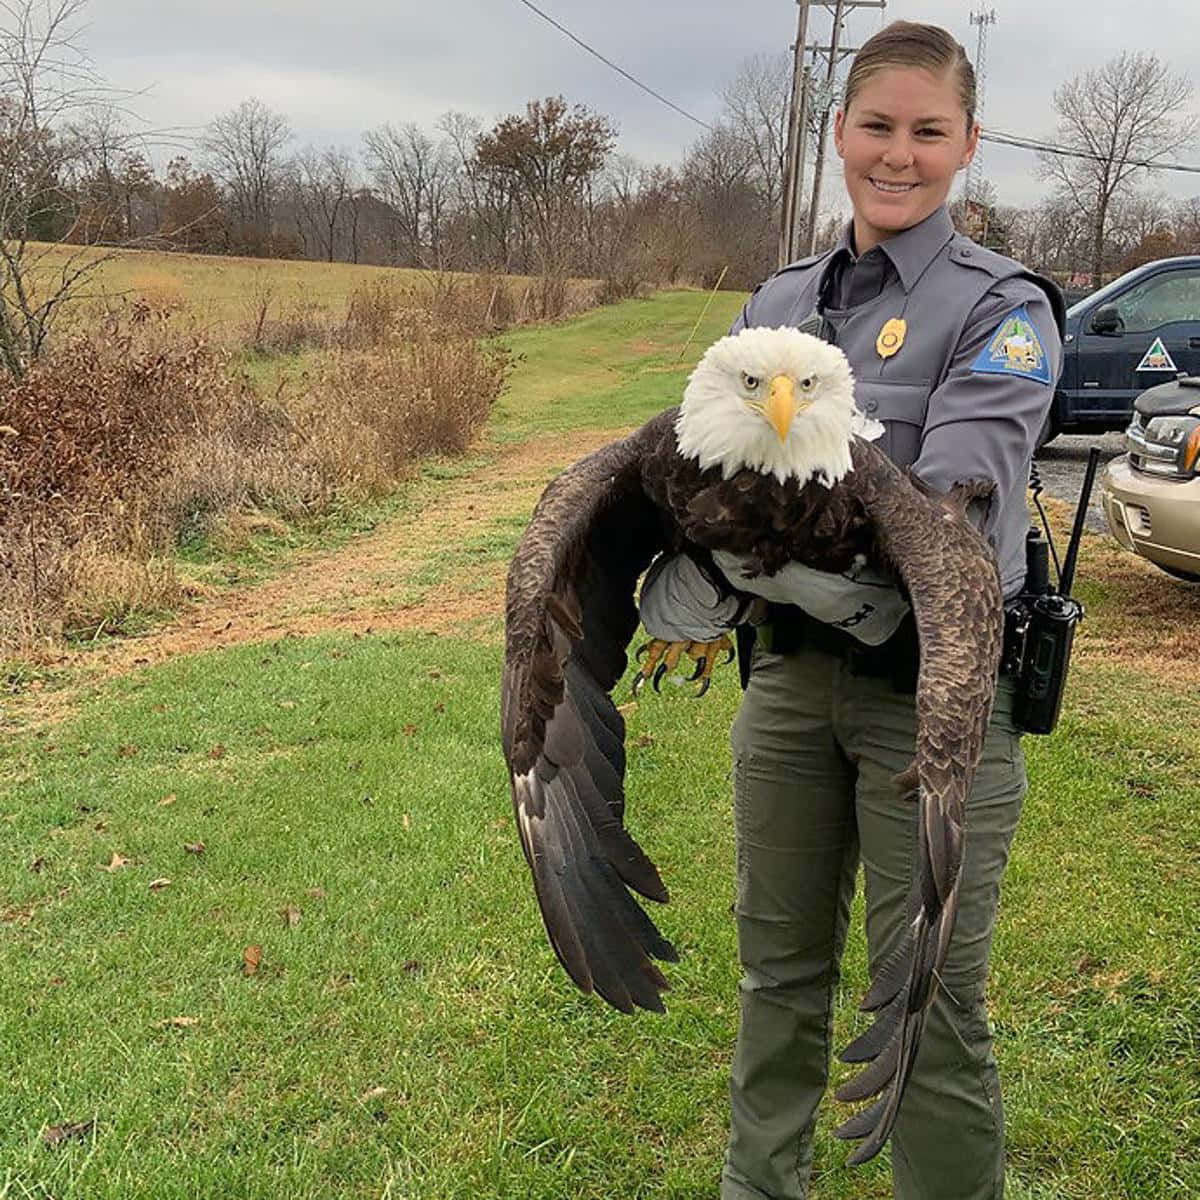 Police Bald Eagle Pictures